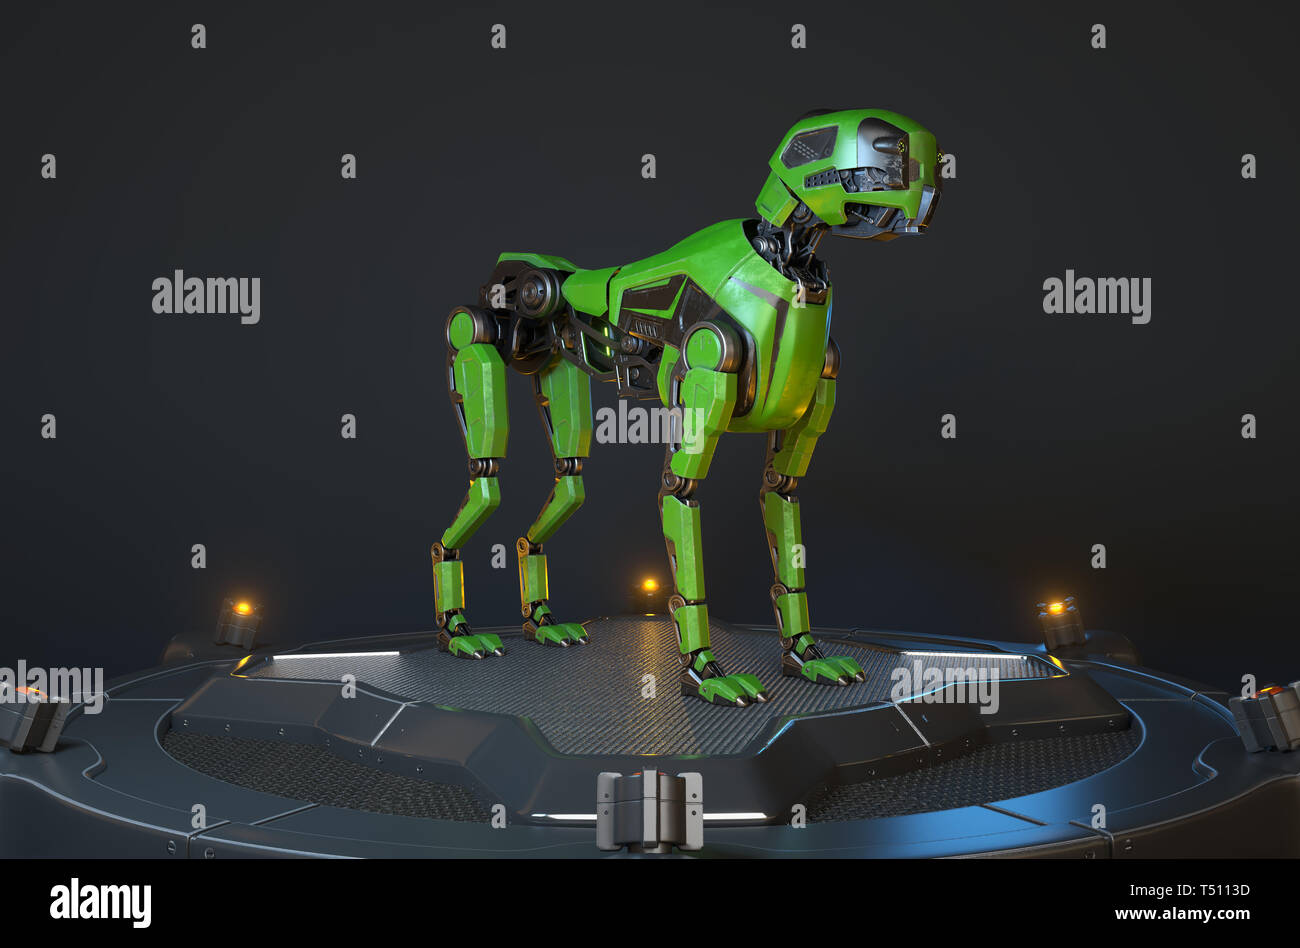 Green robot dog stands on a charging dock. 3D illustration Stock Photo